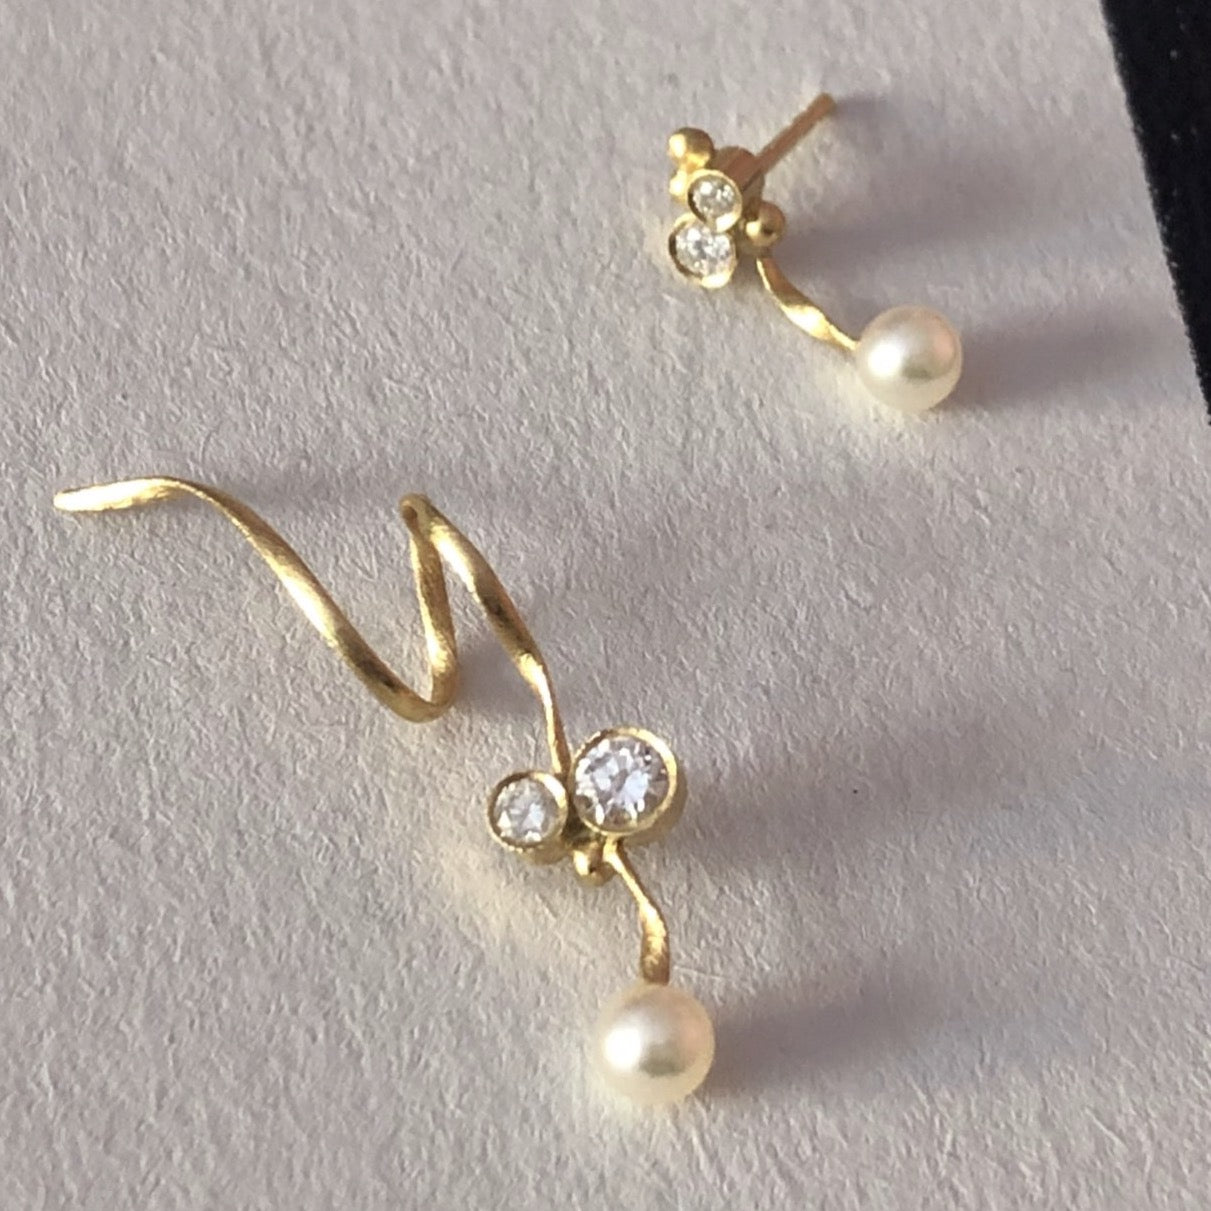 Flair earring in 18kt. diamonds and one Akoya pearl